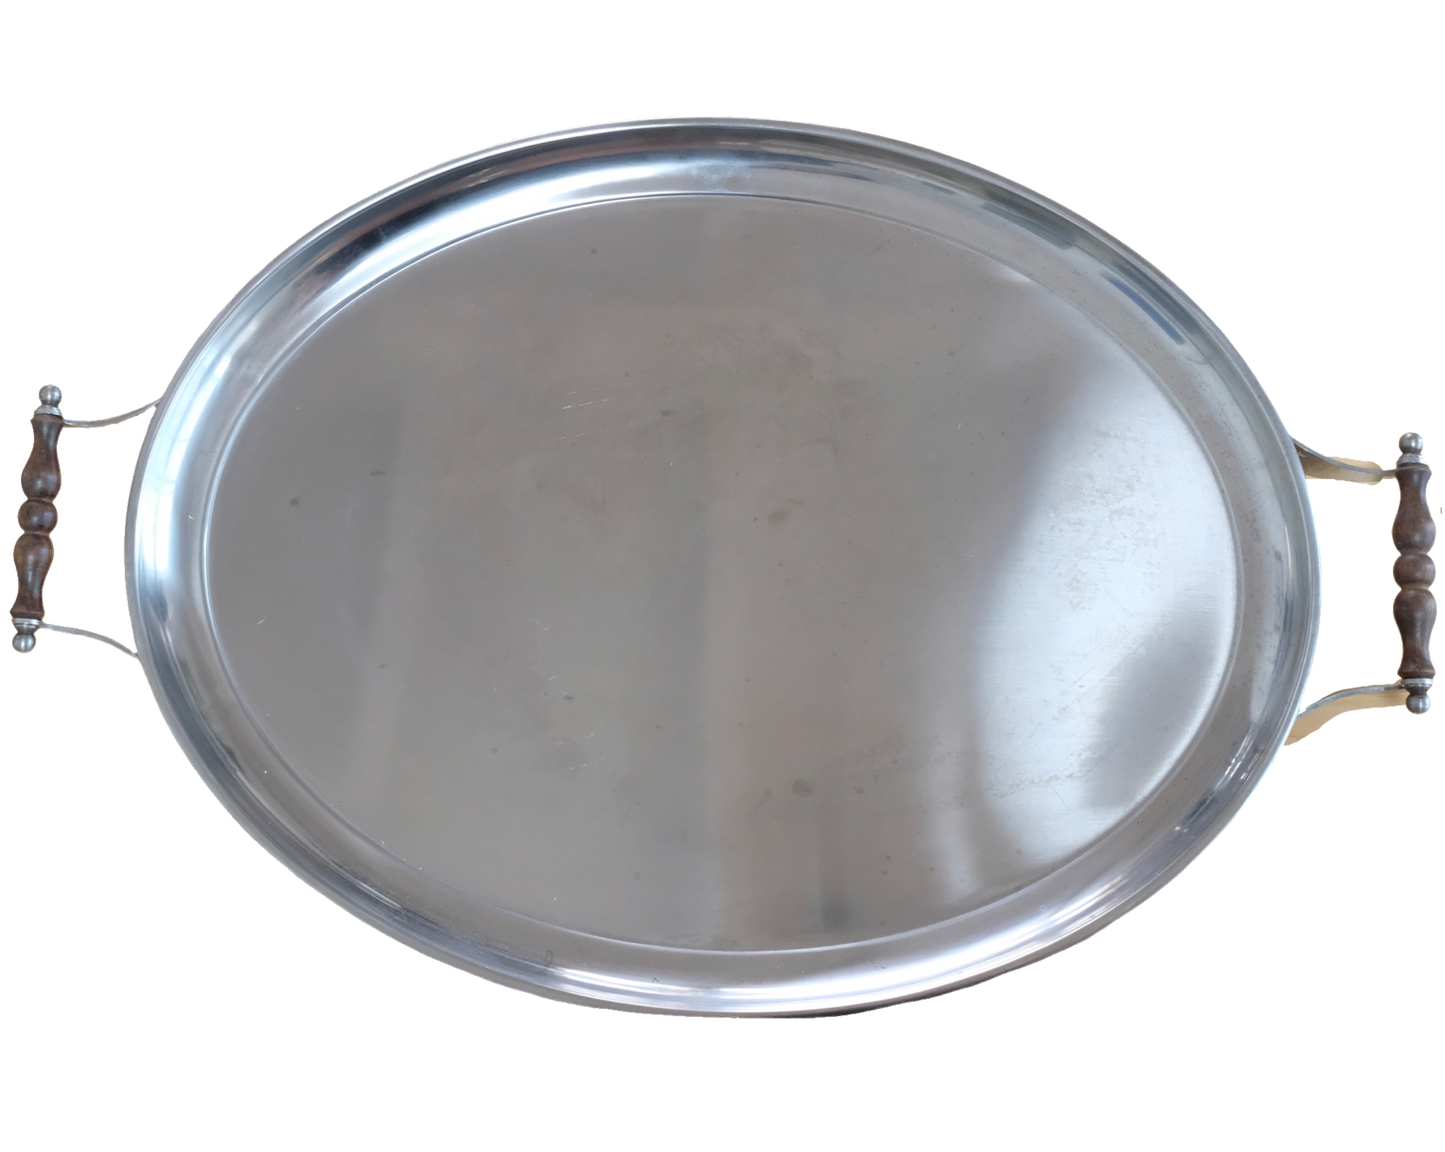 Vintage Silver Serving Tray with Handles